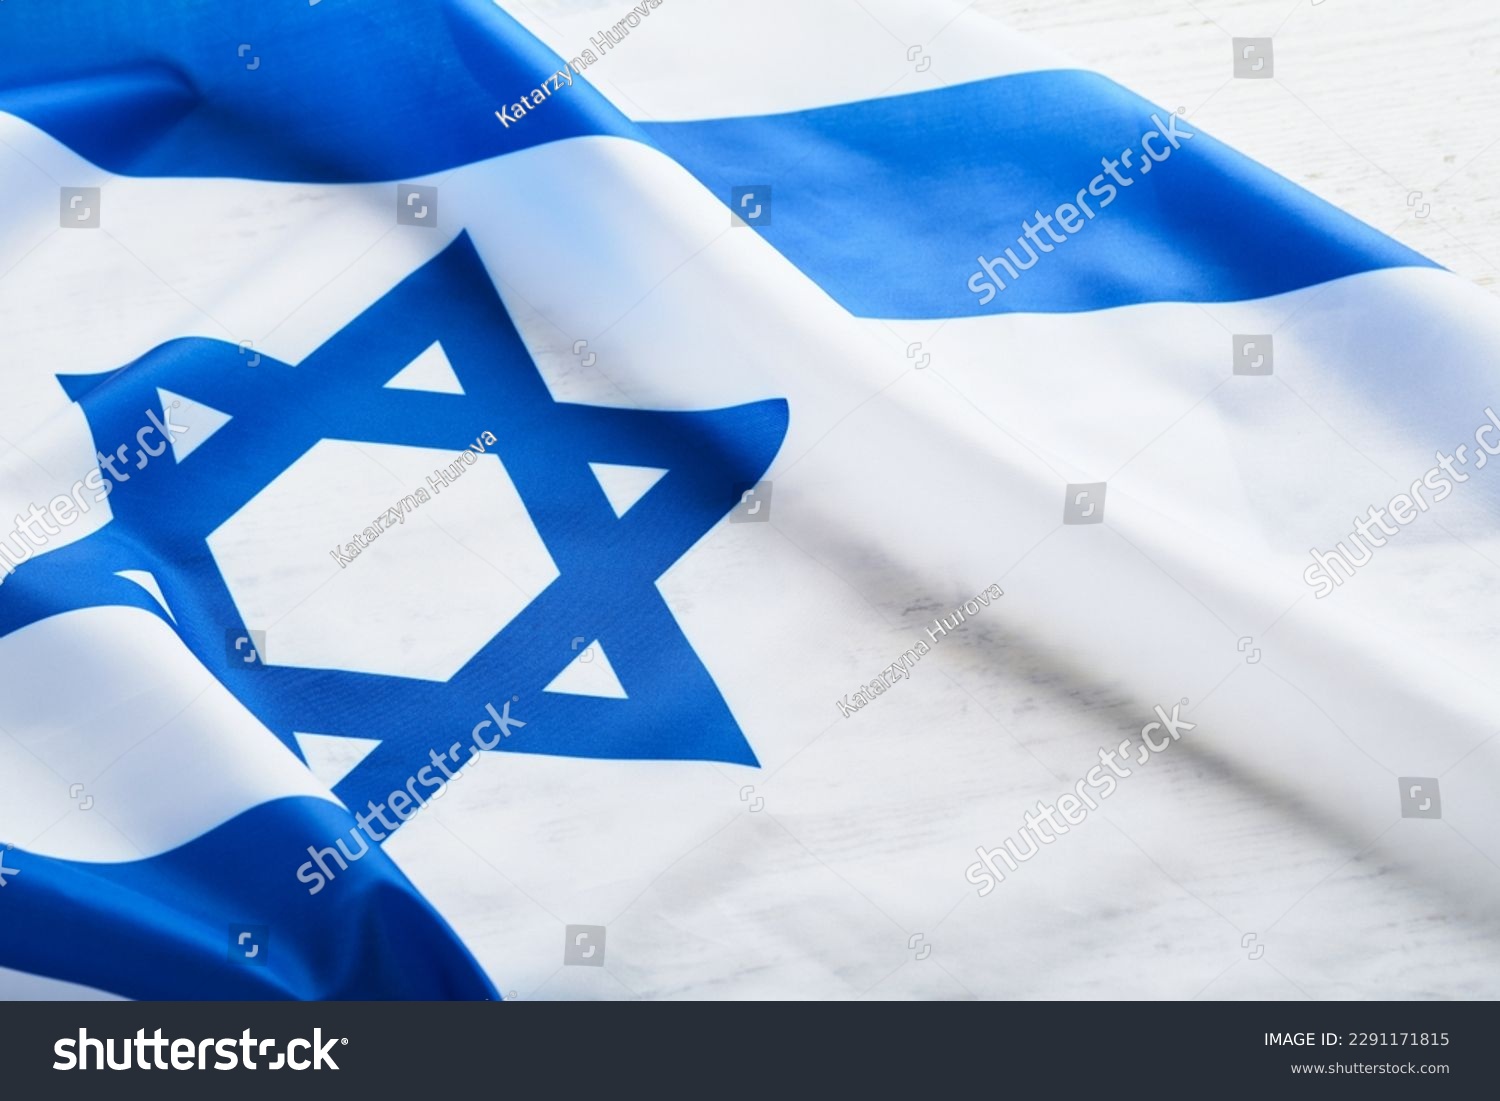 Independence Day of Israel. National Israel flag with star of David over white wooden background. Close up. National flag with place for text. #2291171815